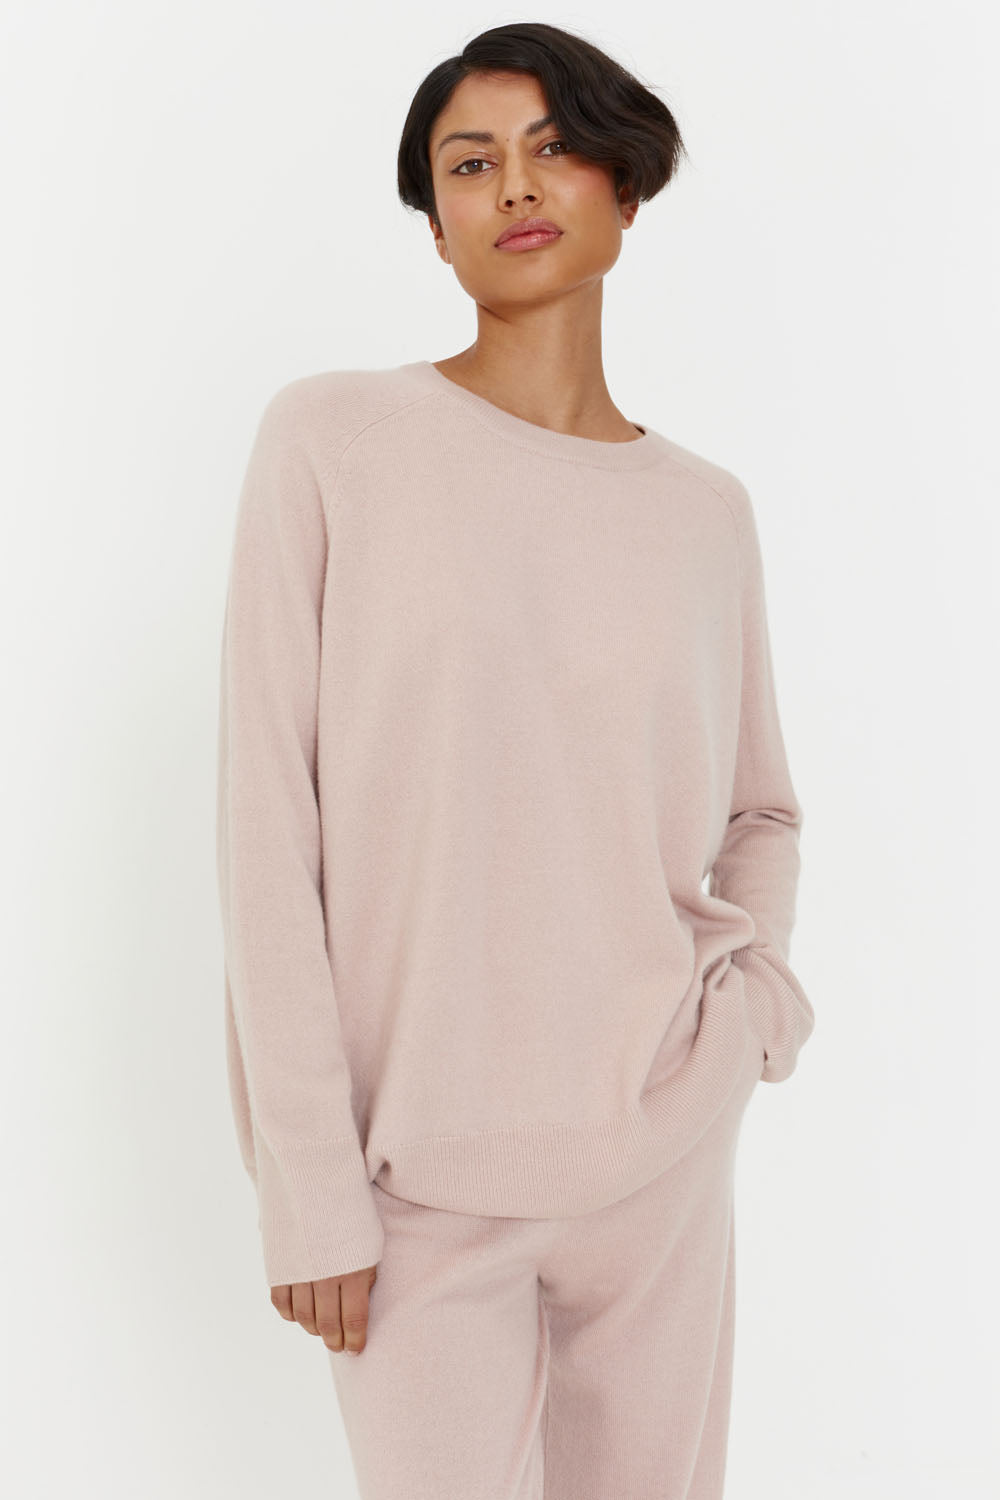 Powder-Pink Cashmere Slouchy Sweater